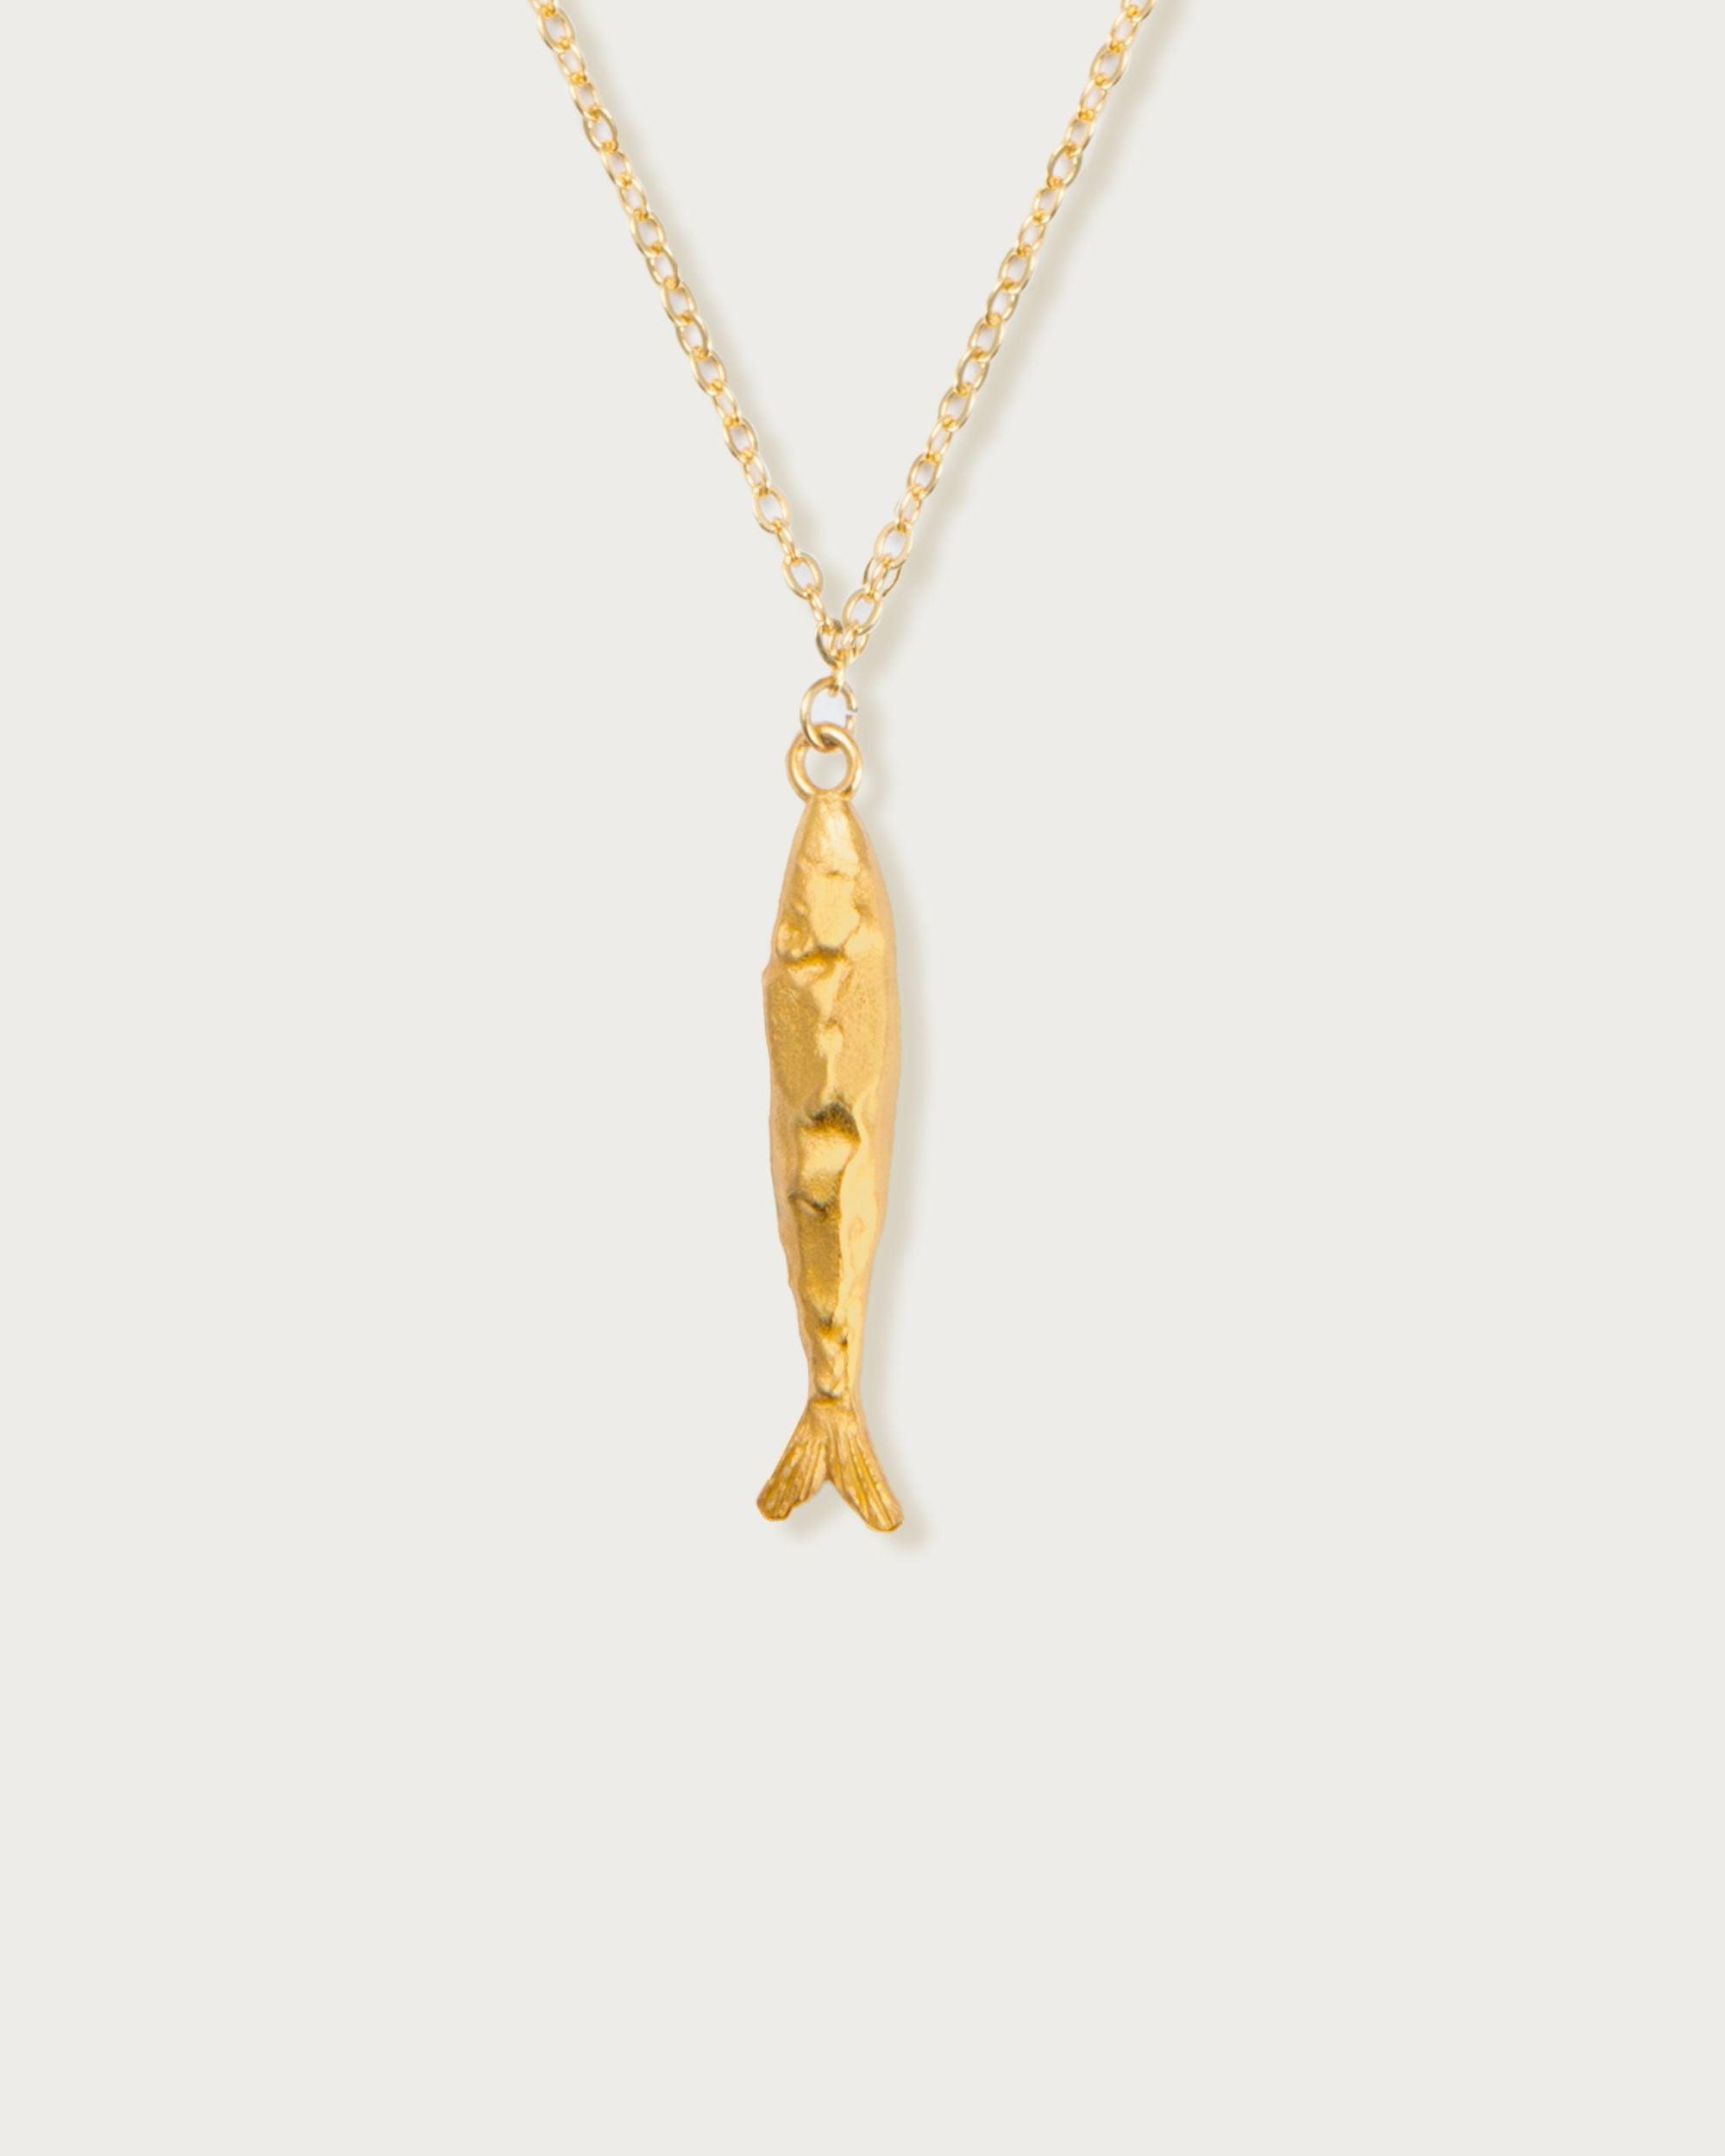 Gold Anchovy Necklace - En Route Jewelry